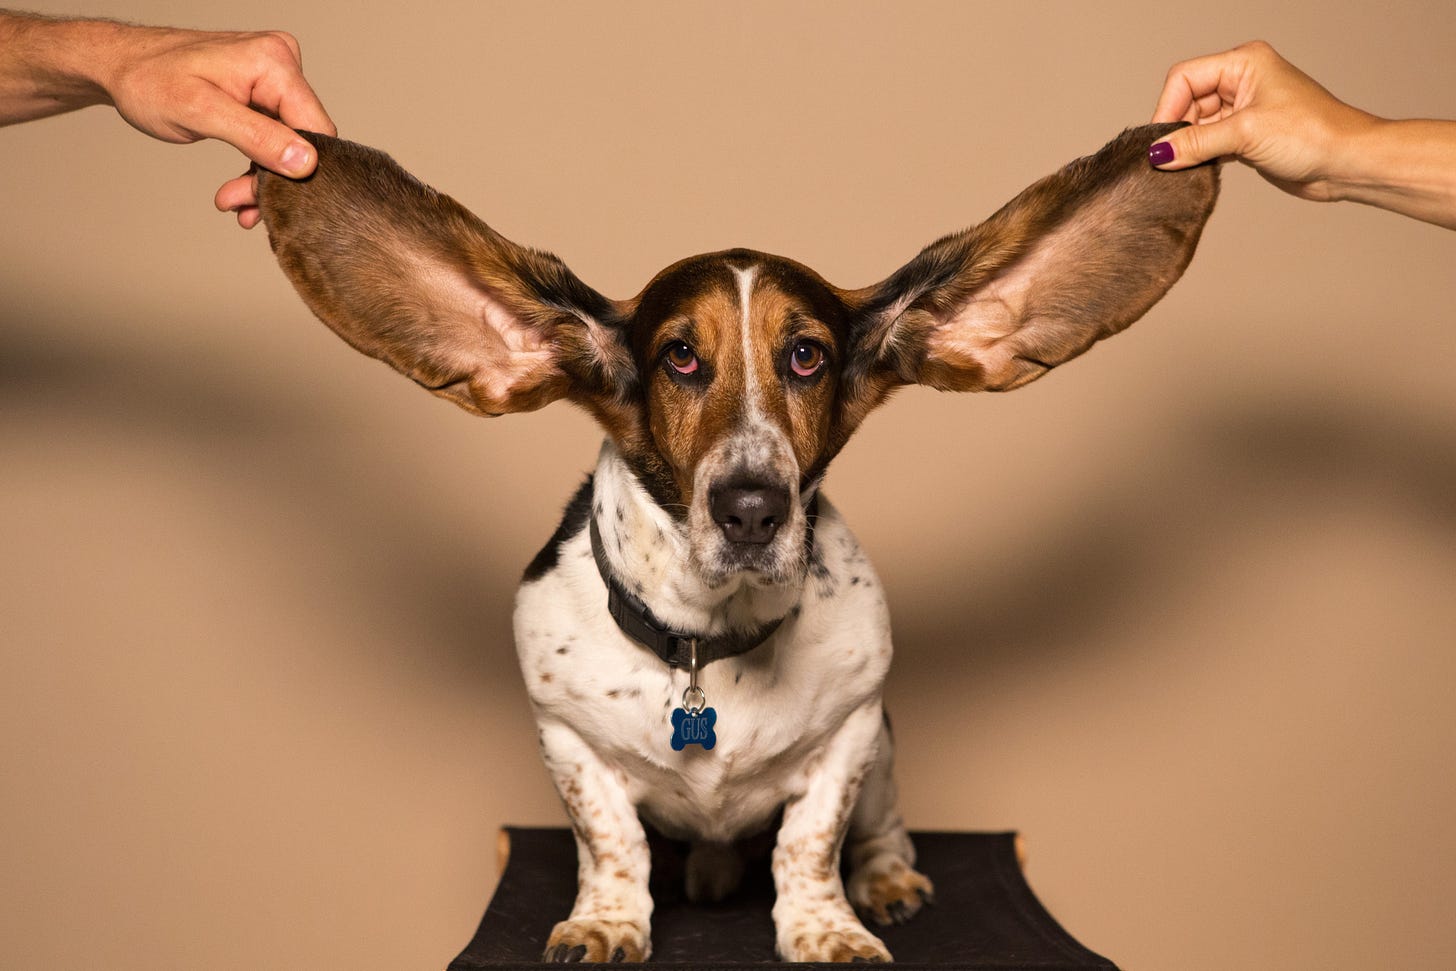 Dog with big ears held up by human hands